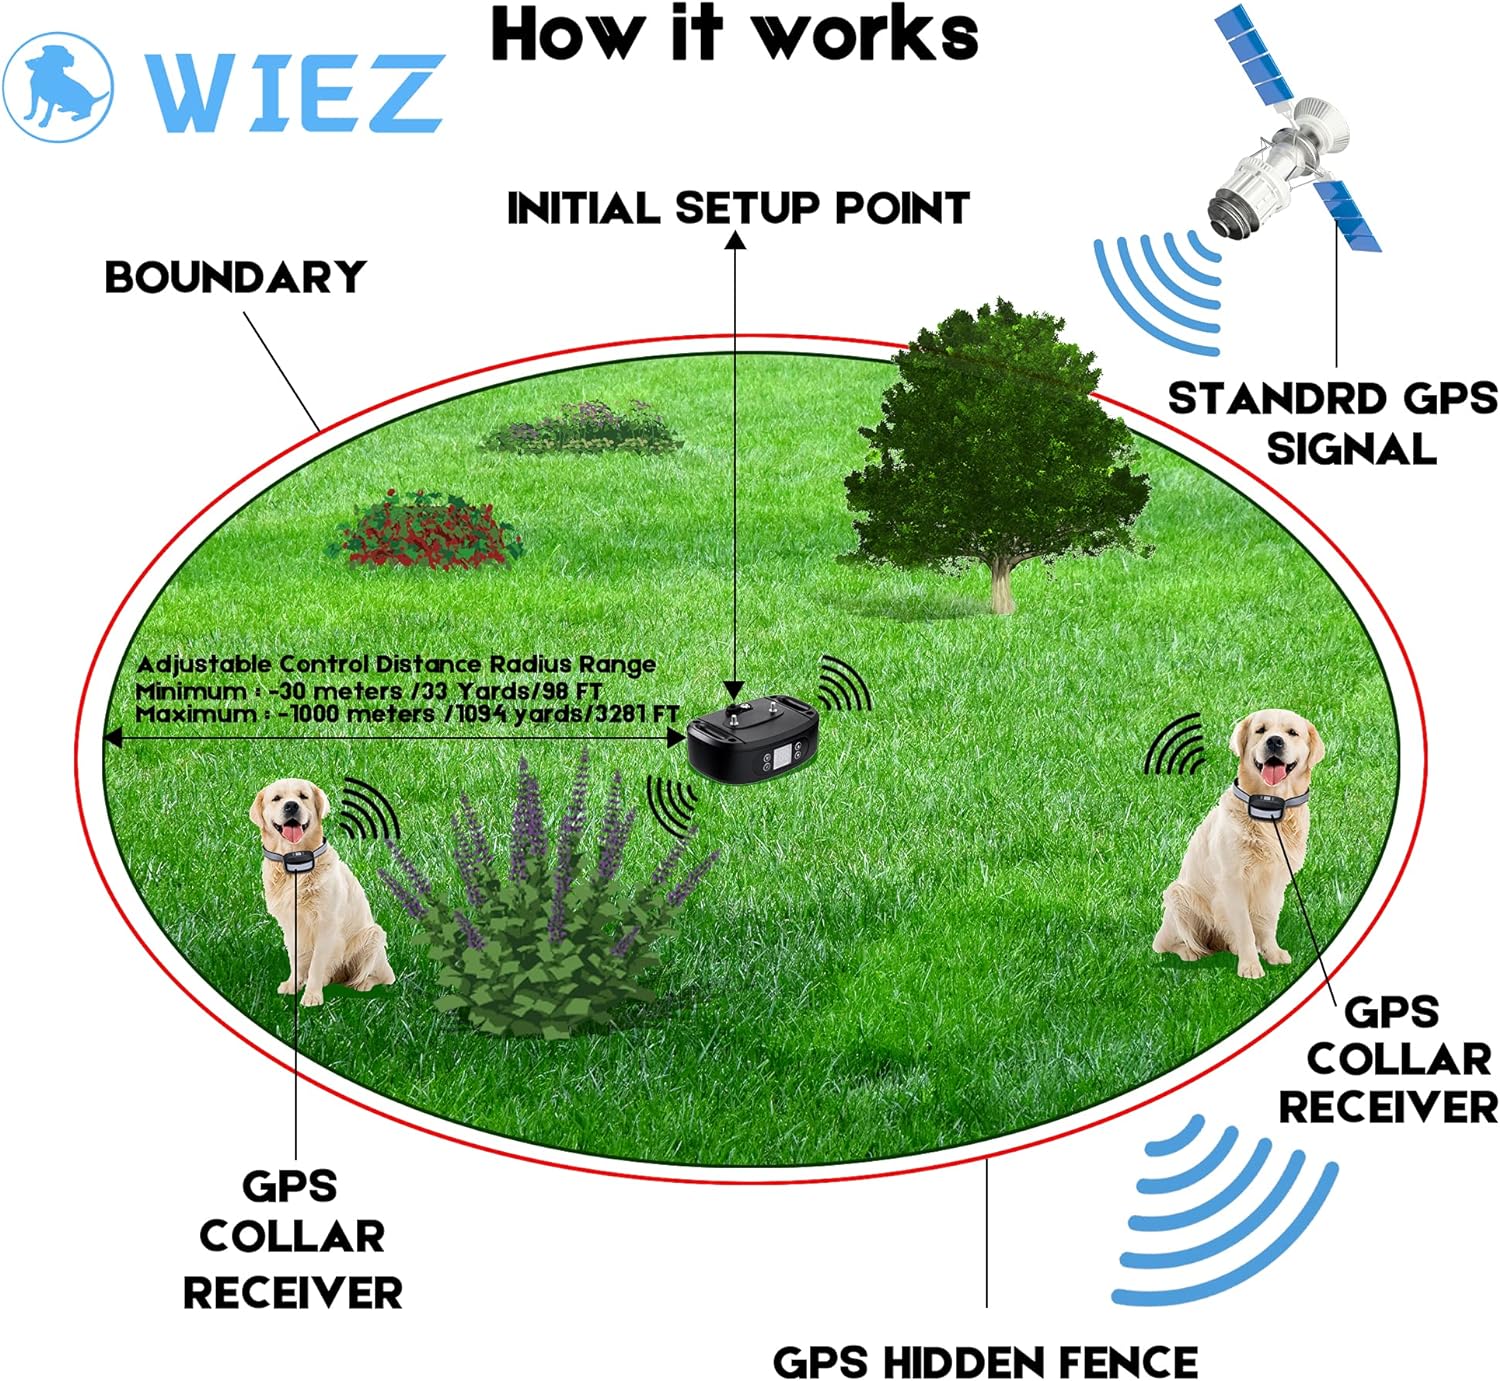 WIEZ GPS Wireless Dog Fence, Electric Dog Fence for Outdoor, Range 100-3300 ft, Adjustable Warning Strength, Rechargeable, Pet Containment System, Suitable for All Medium and Large Dogs(2 Collars)